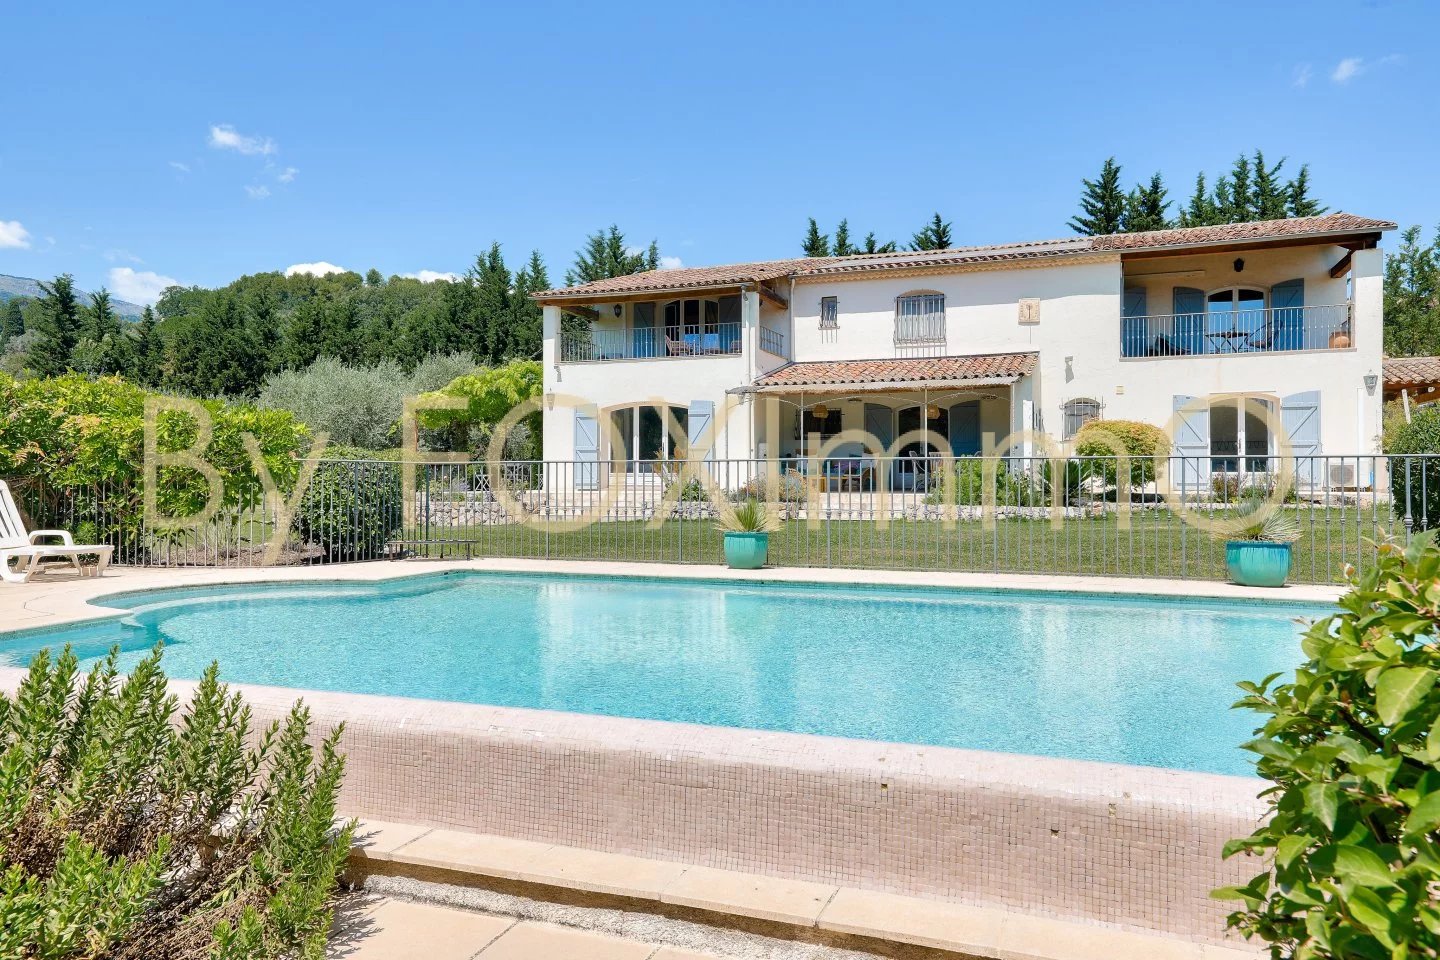 Magnificent property, Valbonne boundary, Neo-Provencal chic, Absolute peace and quiet, Perfect condition, Uninterrupted view, 5/6 bedrooms, Terraces, 5000m2 of flat land,